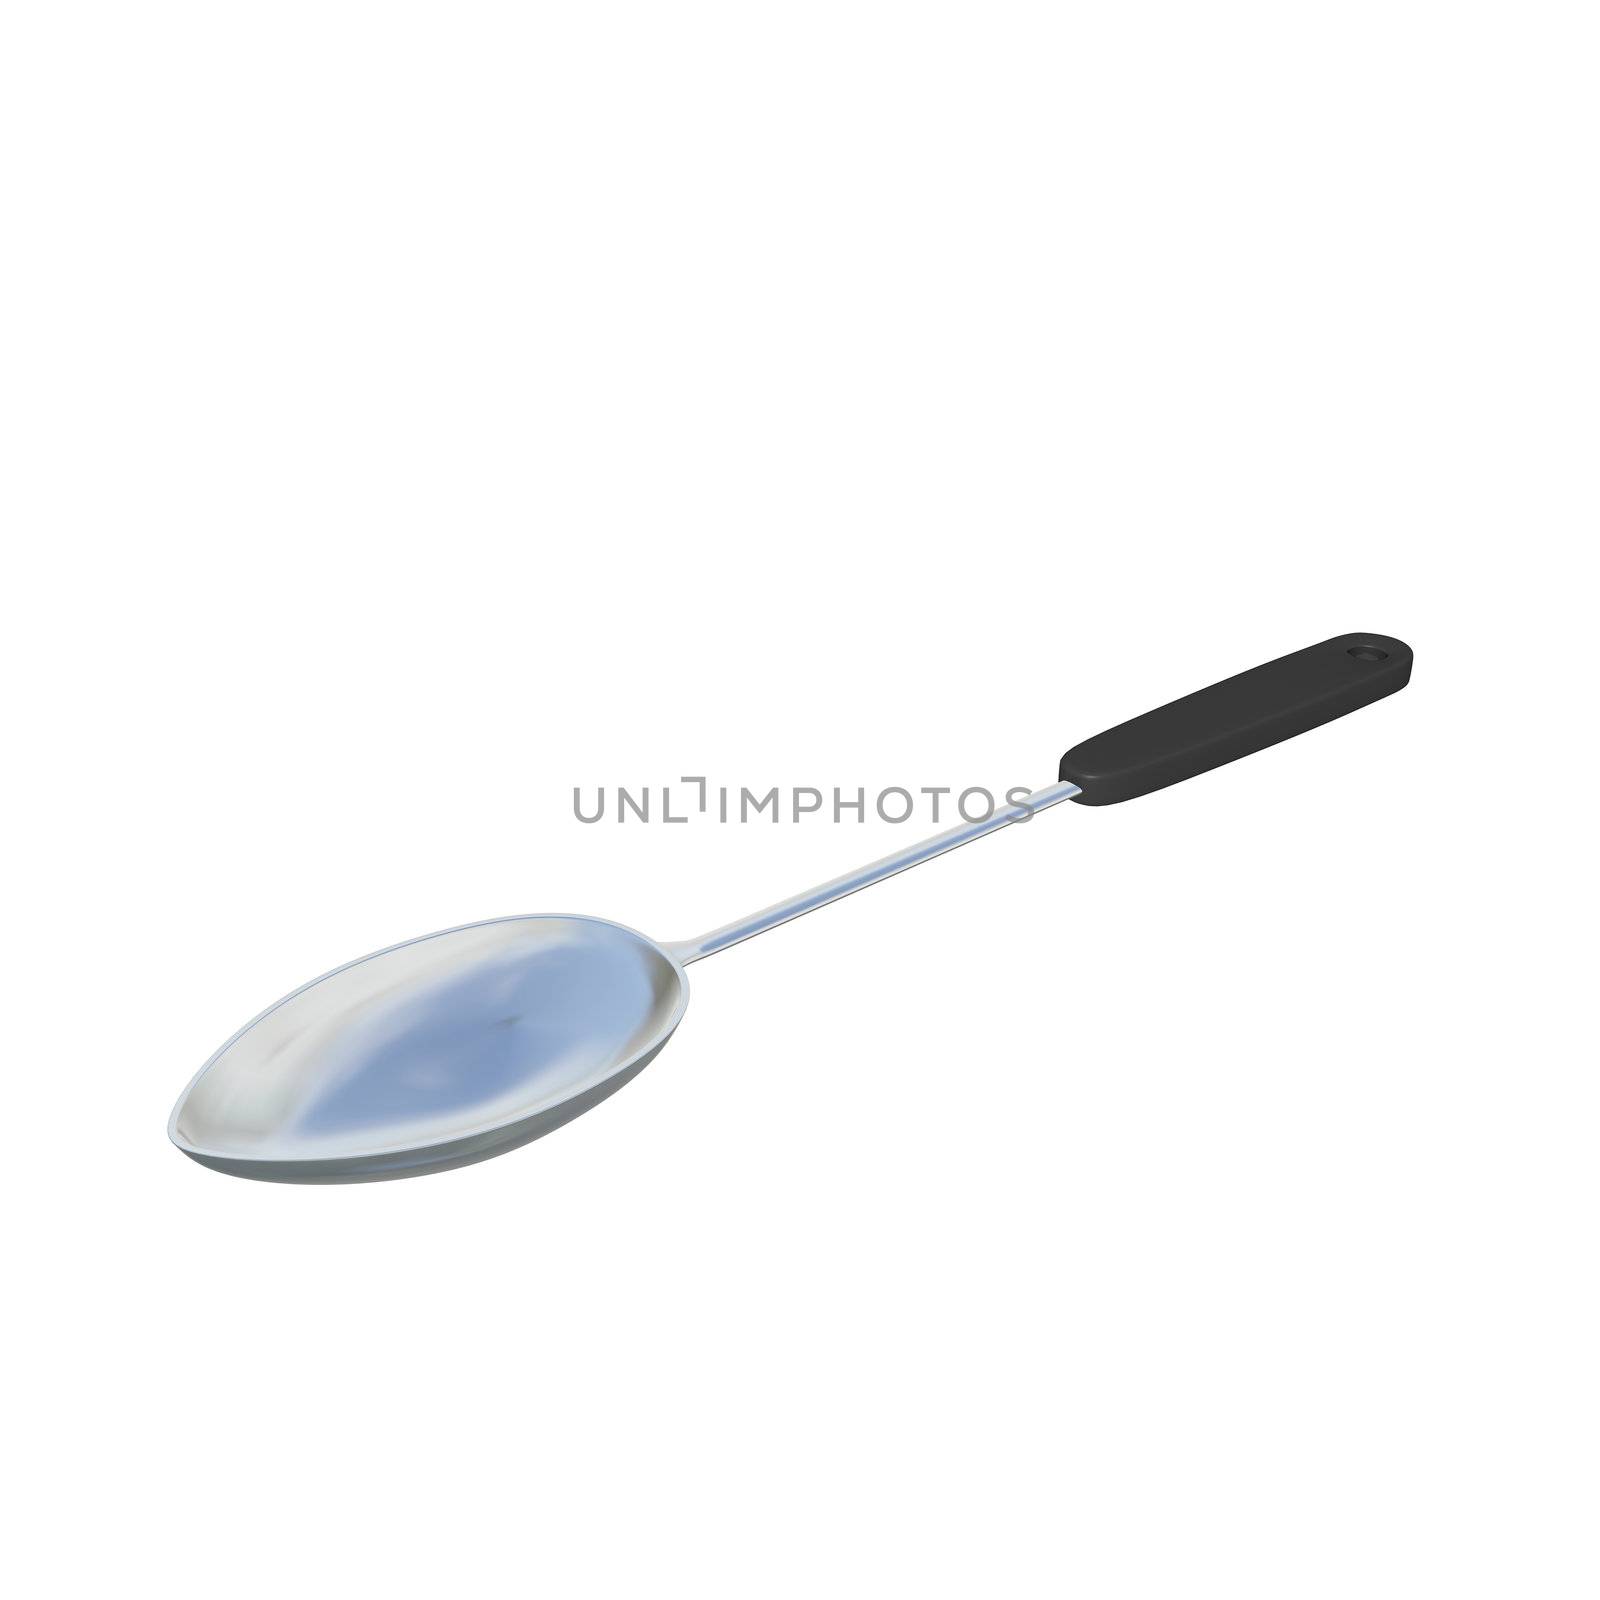 Stainless steel spoon laddle with black handle, 3D illustration, isolated against a white background